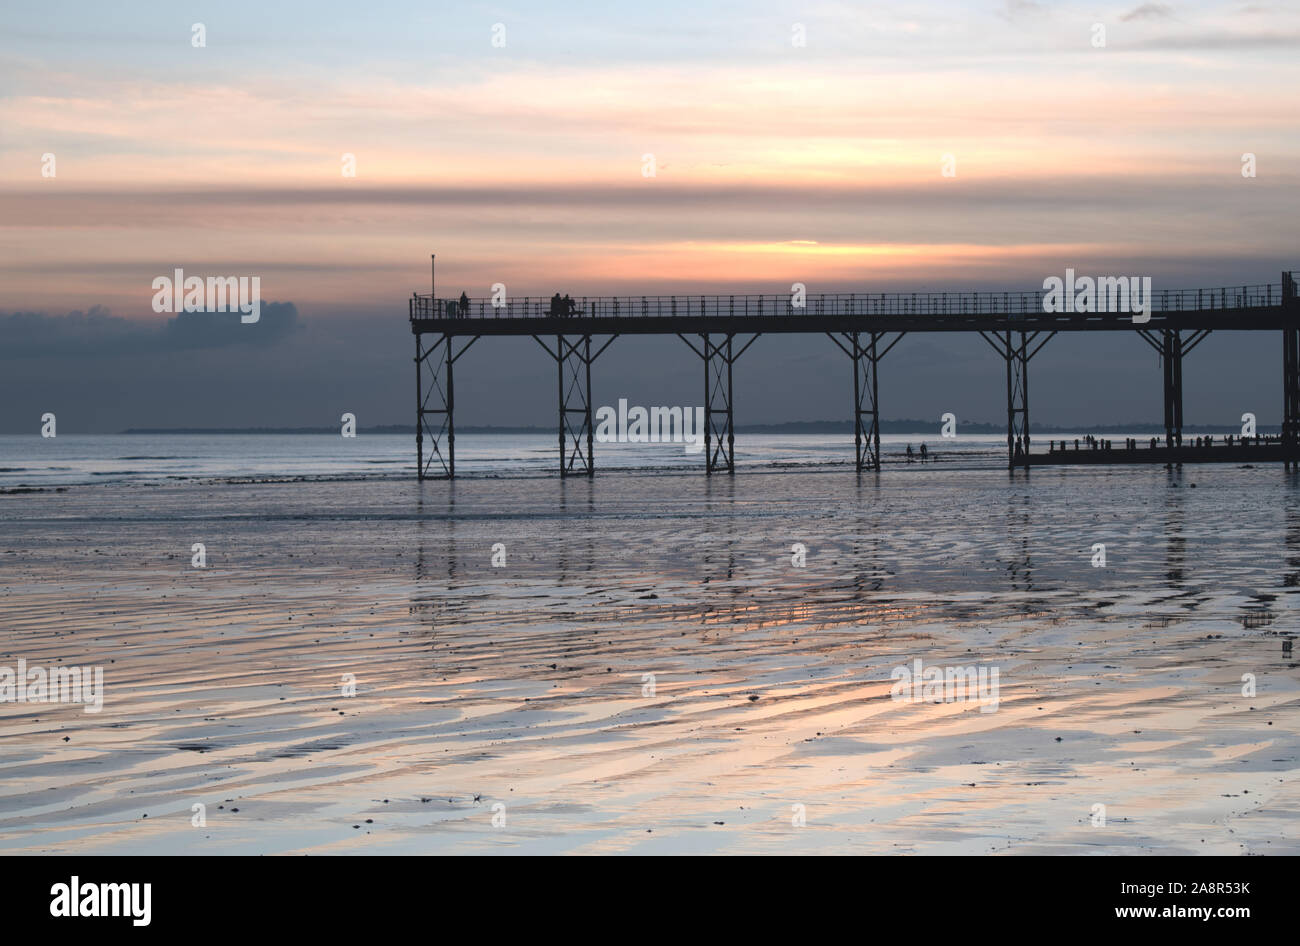 Historic old Pier in Bognor Regis West Sussex with a beautiful sunset behind and reflections on the sand at low tide. Stock Photo